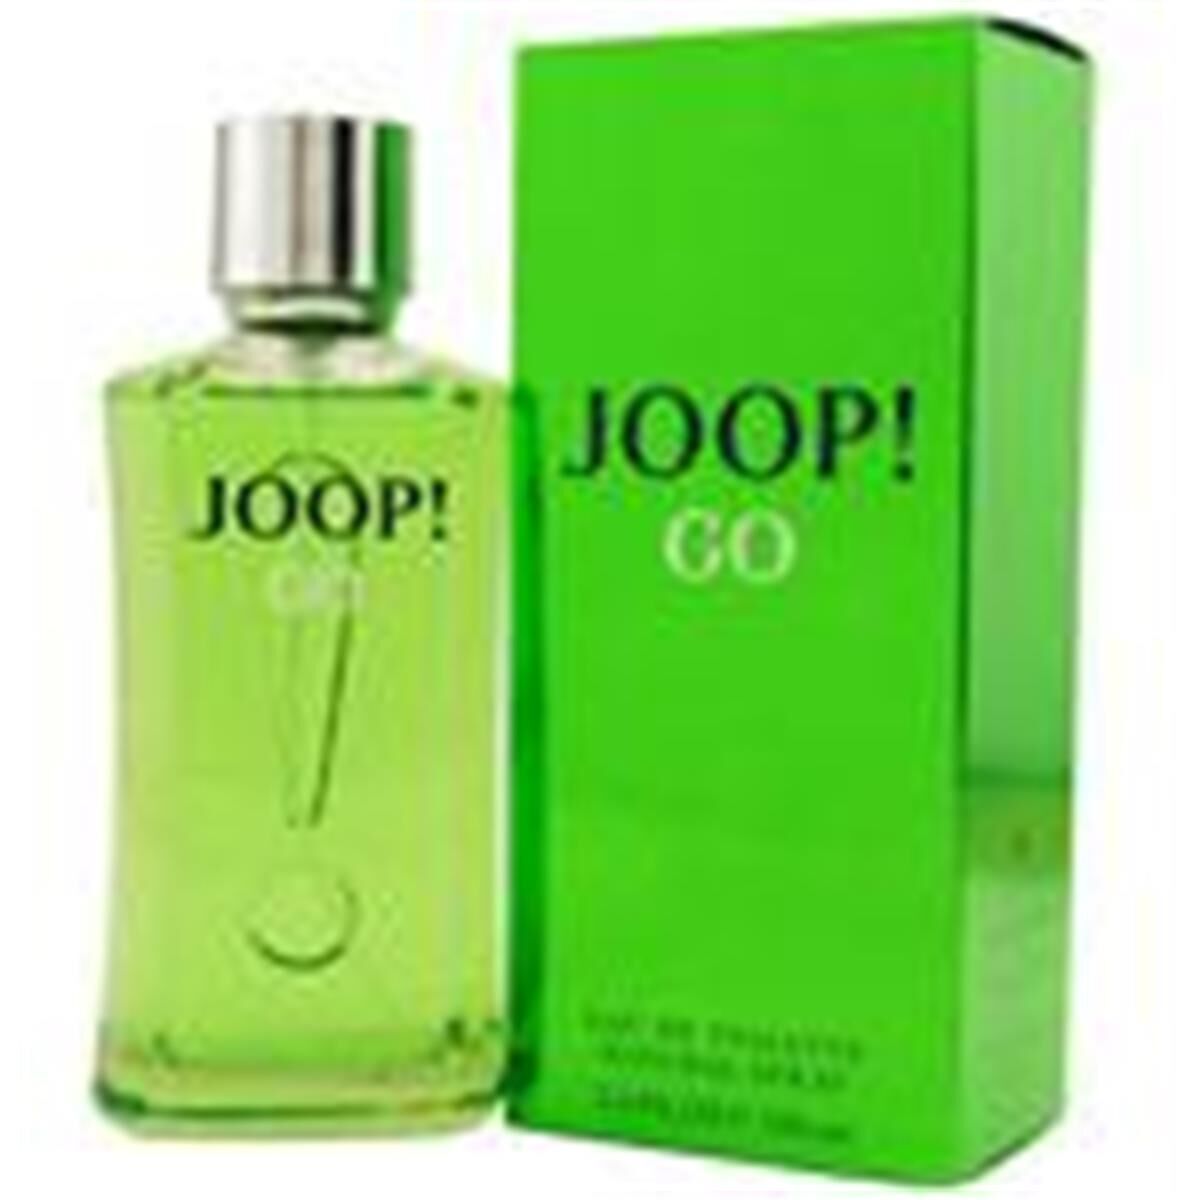 Joop! Go By Joop! Edt Cologne Spray 3.4 Oz One Size male